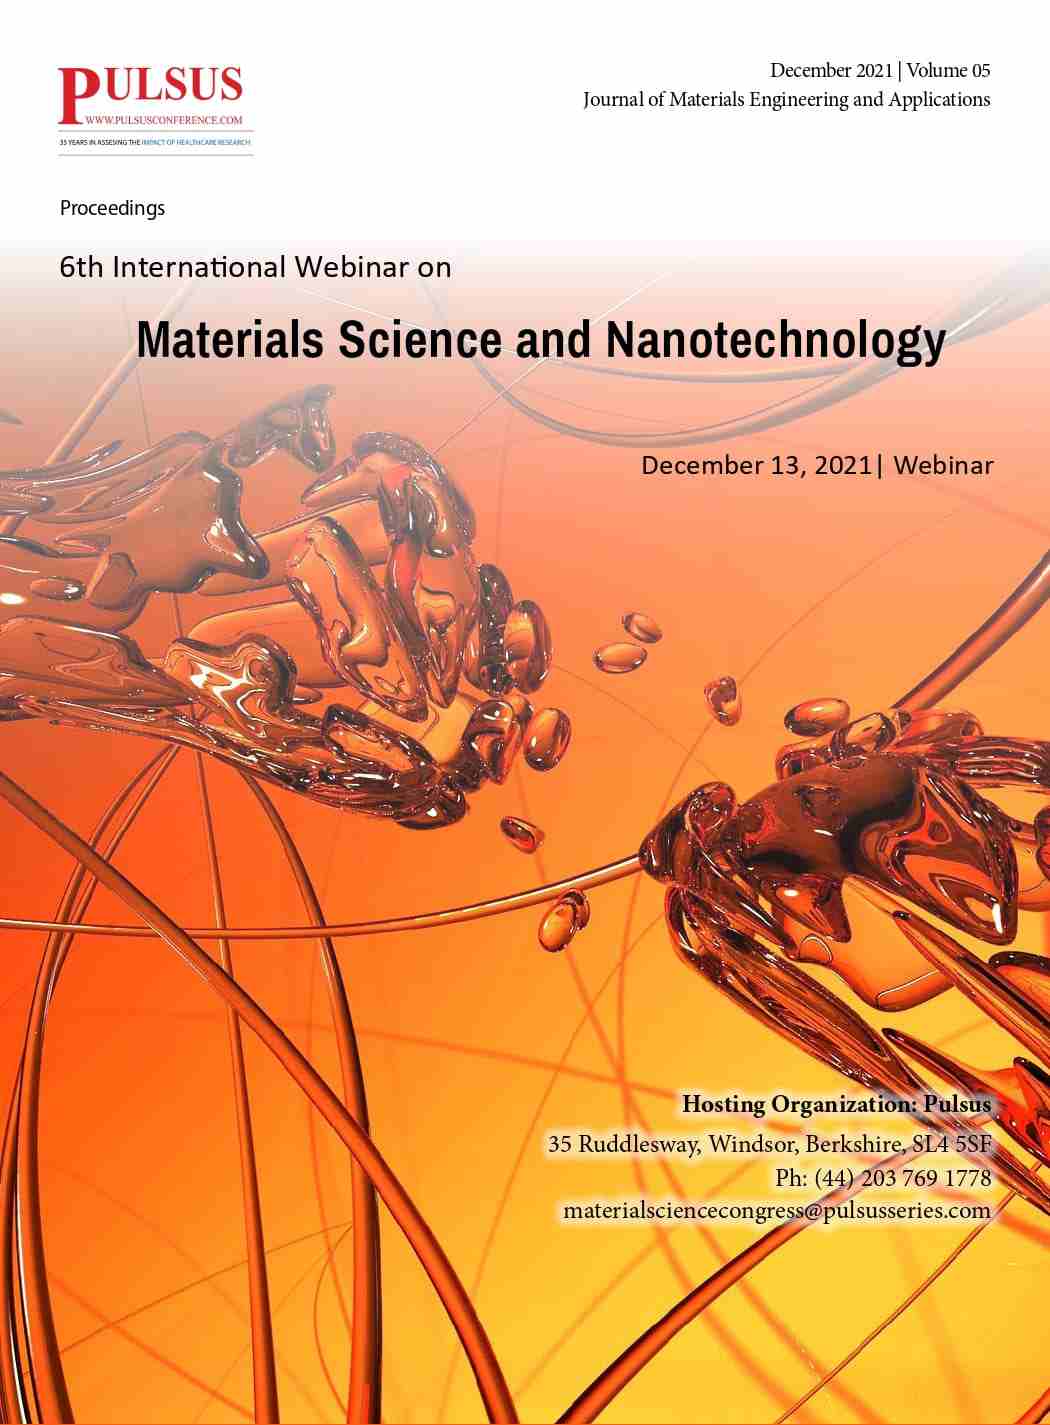 https://www.pulsus.com/conference-abstracts/nanotechnology-summit-2022-proceedings.html